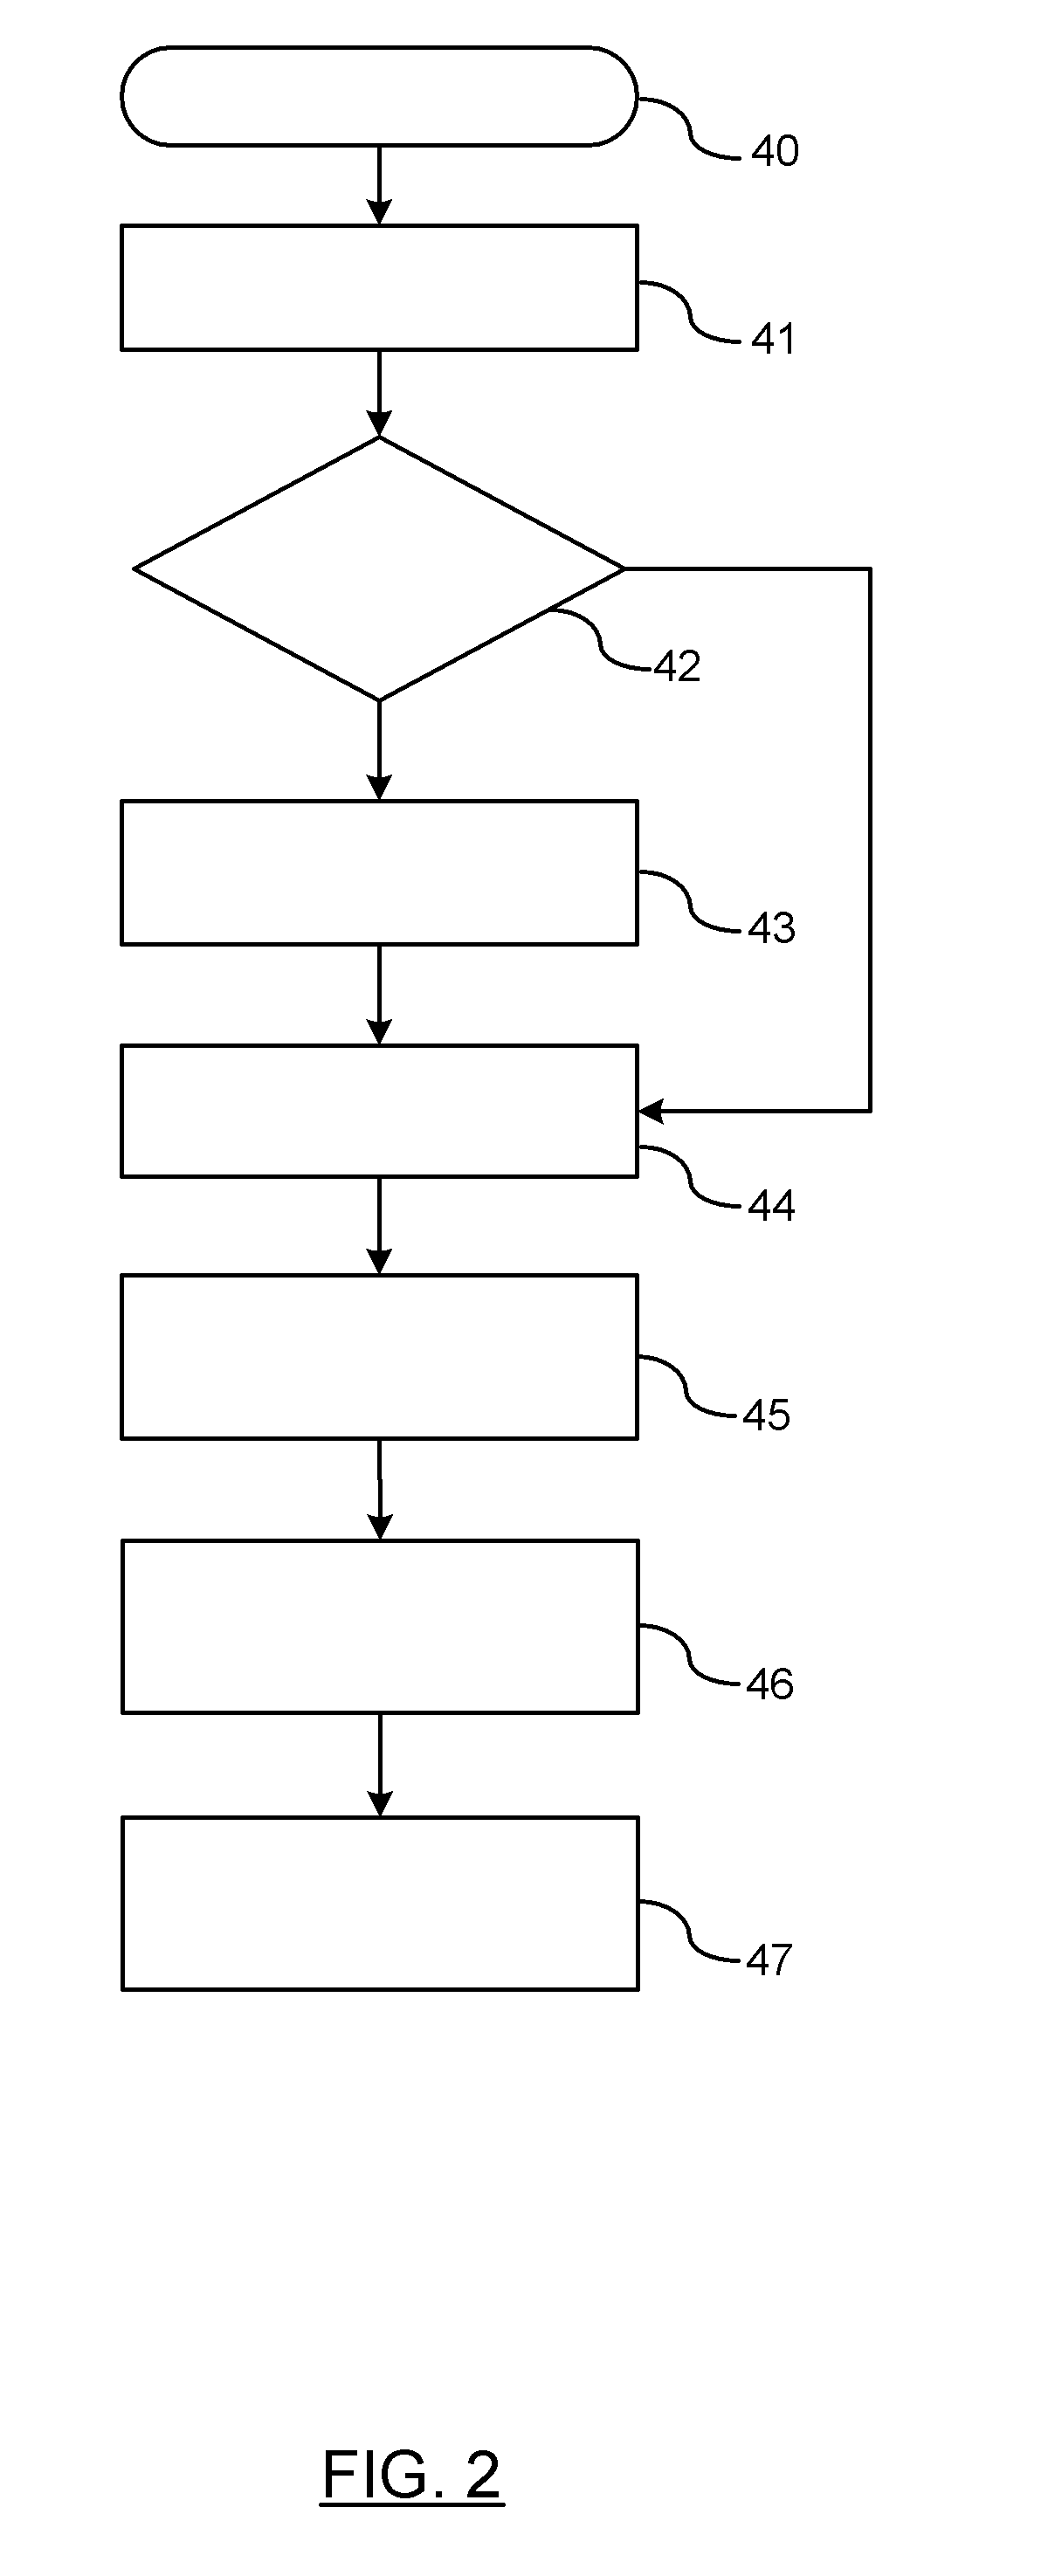 Data Sensor Coordination Using Time Synchronization in a Multi-Bus Controller Area Network System